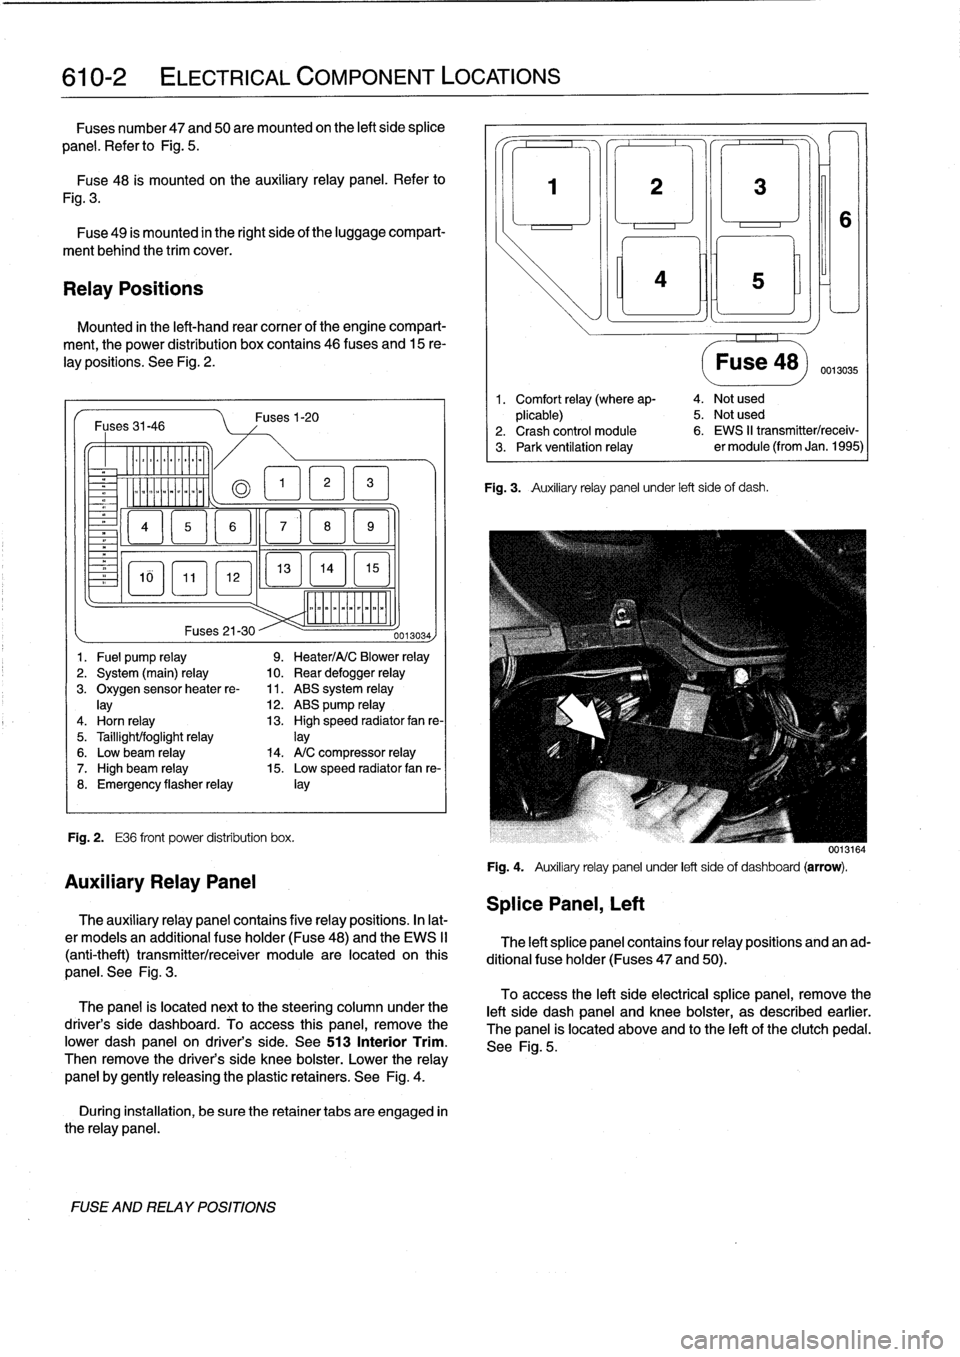 BMW 328i 1994 E36 Workshop Manual 
610-2

	

ELECTRICAL
COMPONENT
LOCATIONS

Fuses
number47
and
50are
mounted
on
the
left
side
splice

panel
.
Refer
lo
Fig
.
5
.

Fuse48
is
mounted
on
the
auxiliary
relay
panel
.
Refer
to

Fig
.
3
.

F